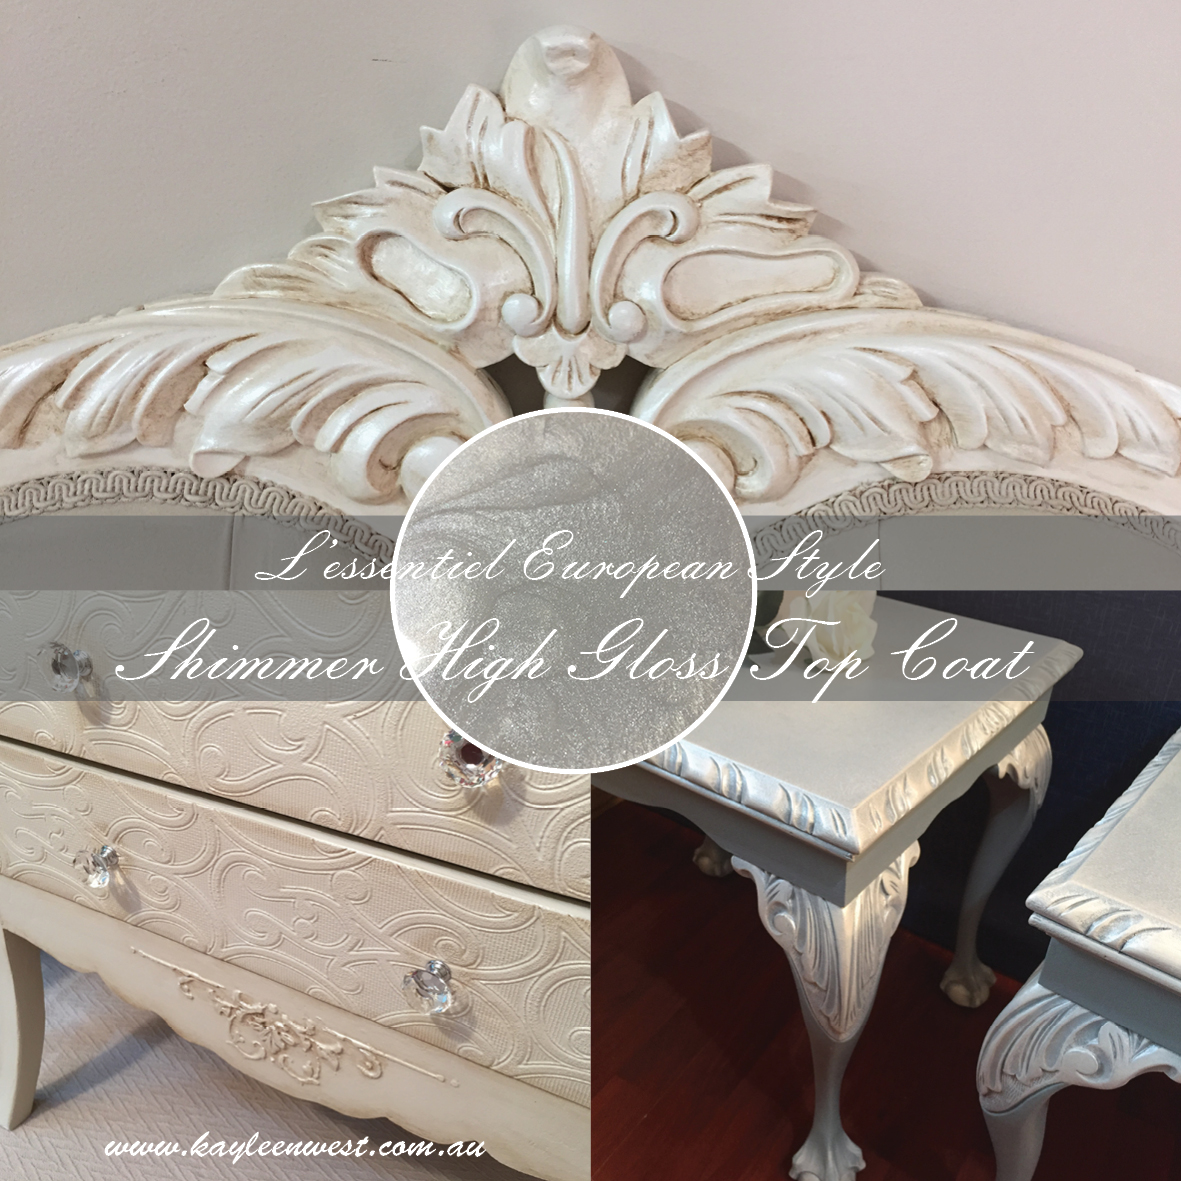 Specialty paint finishes Upcycled Beauty